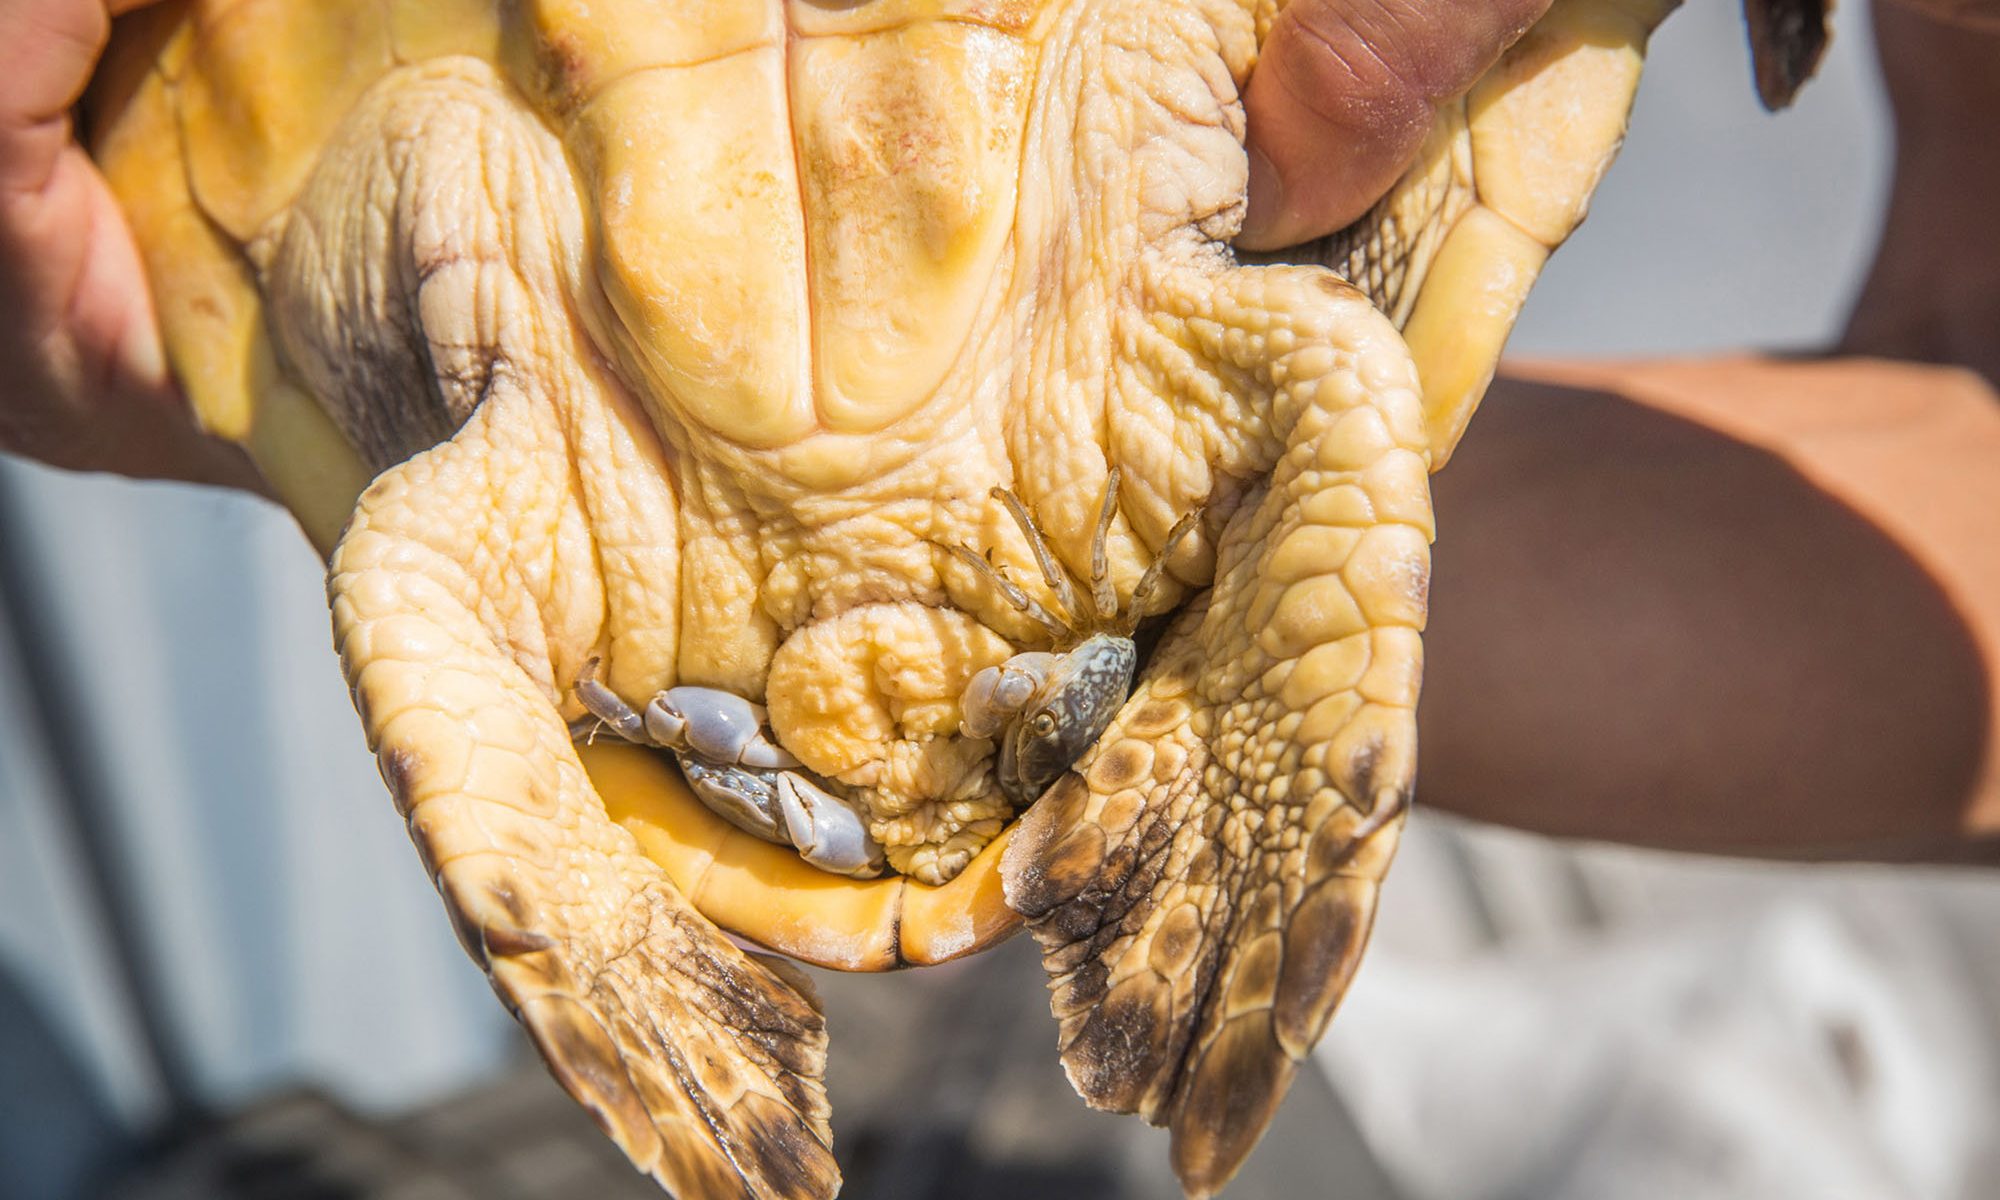 hands holding small turtle with two crabs tucked into its shell by its hind flippers